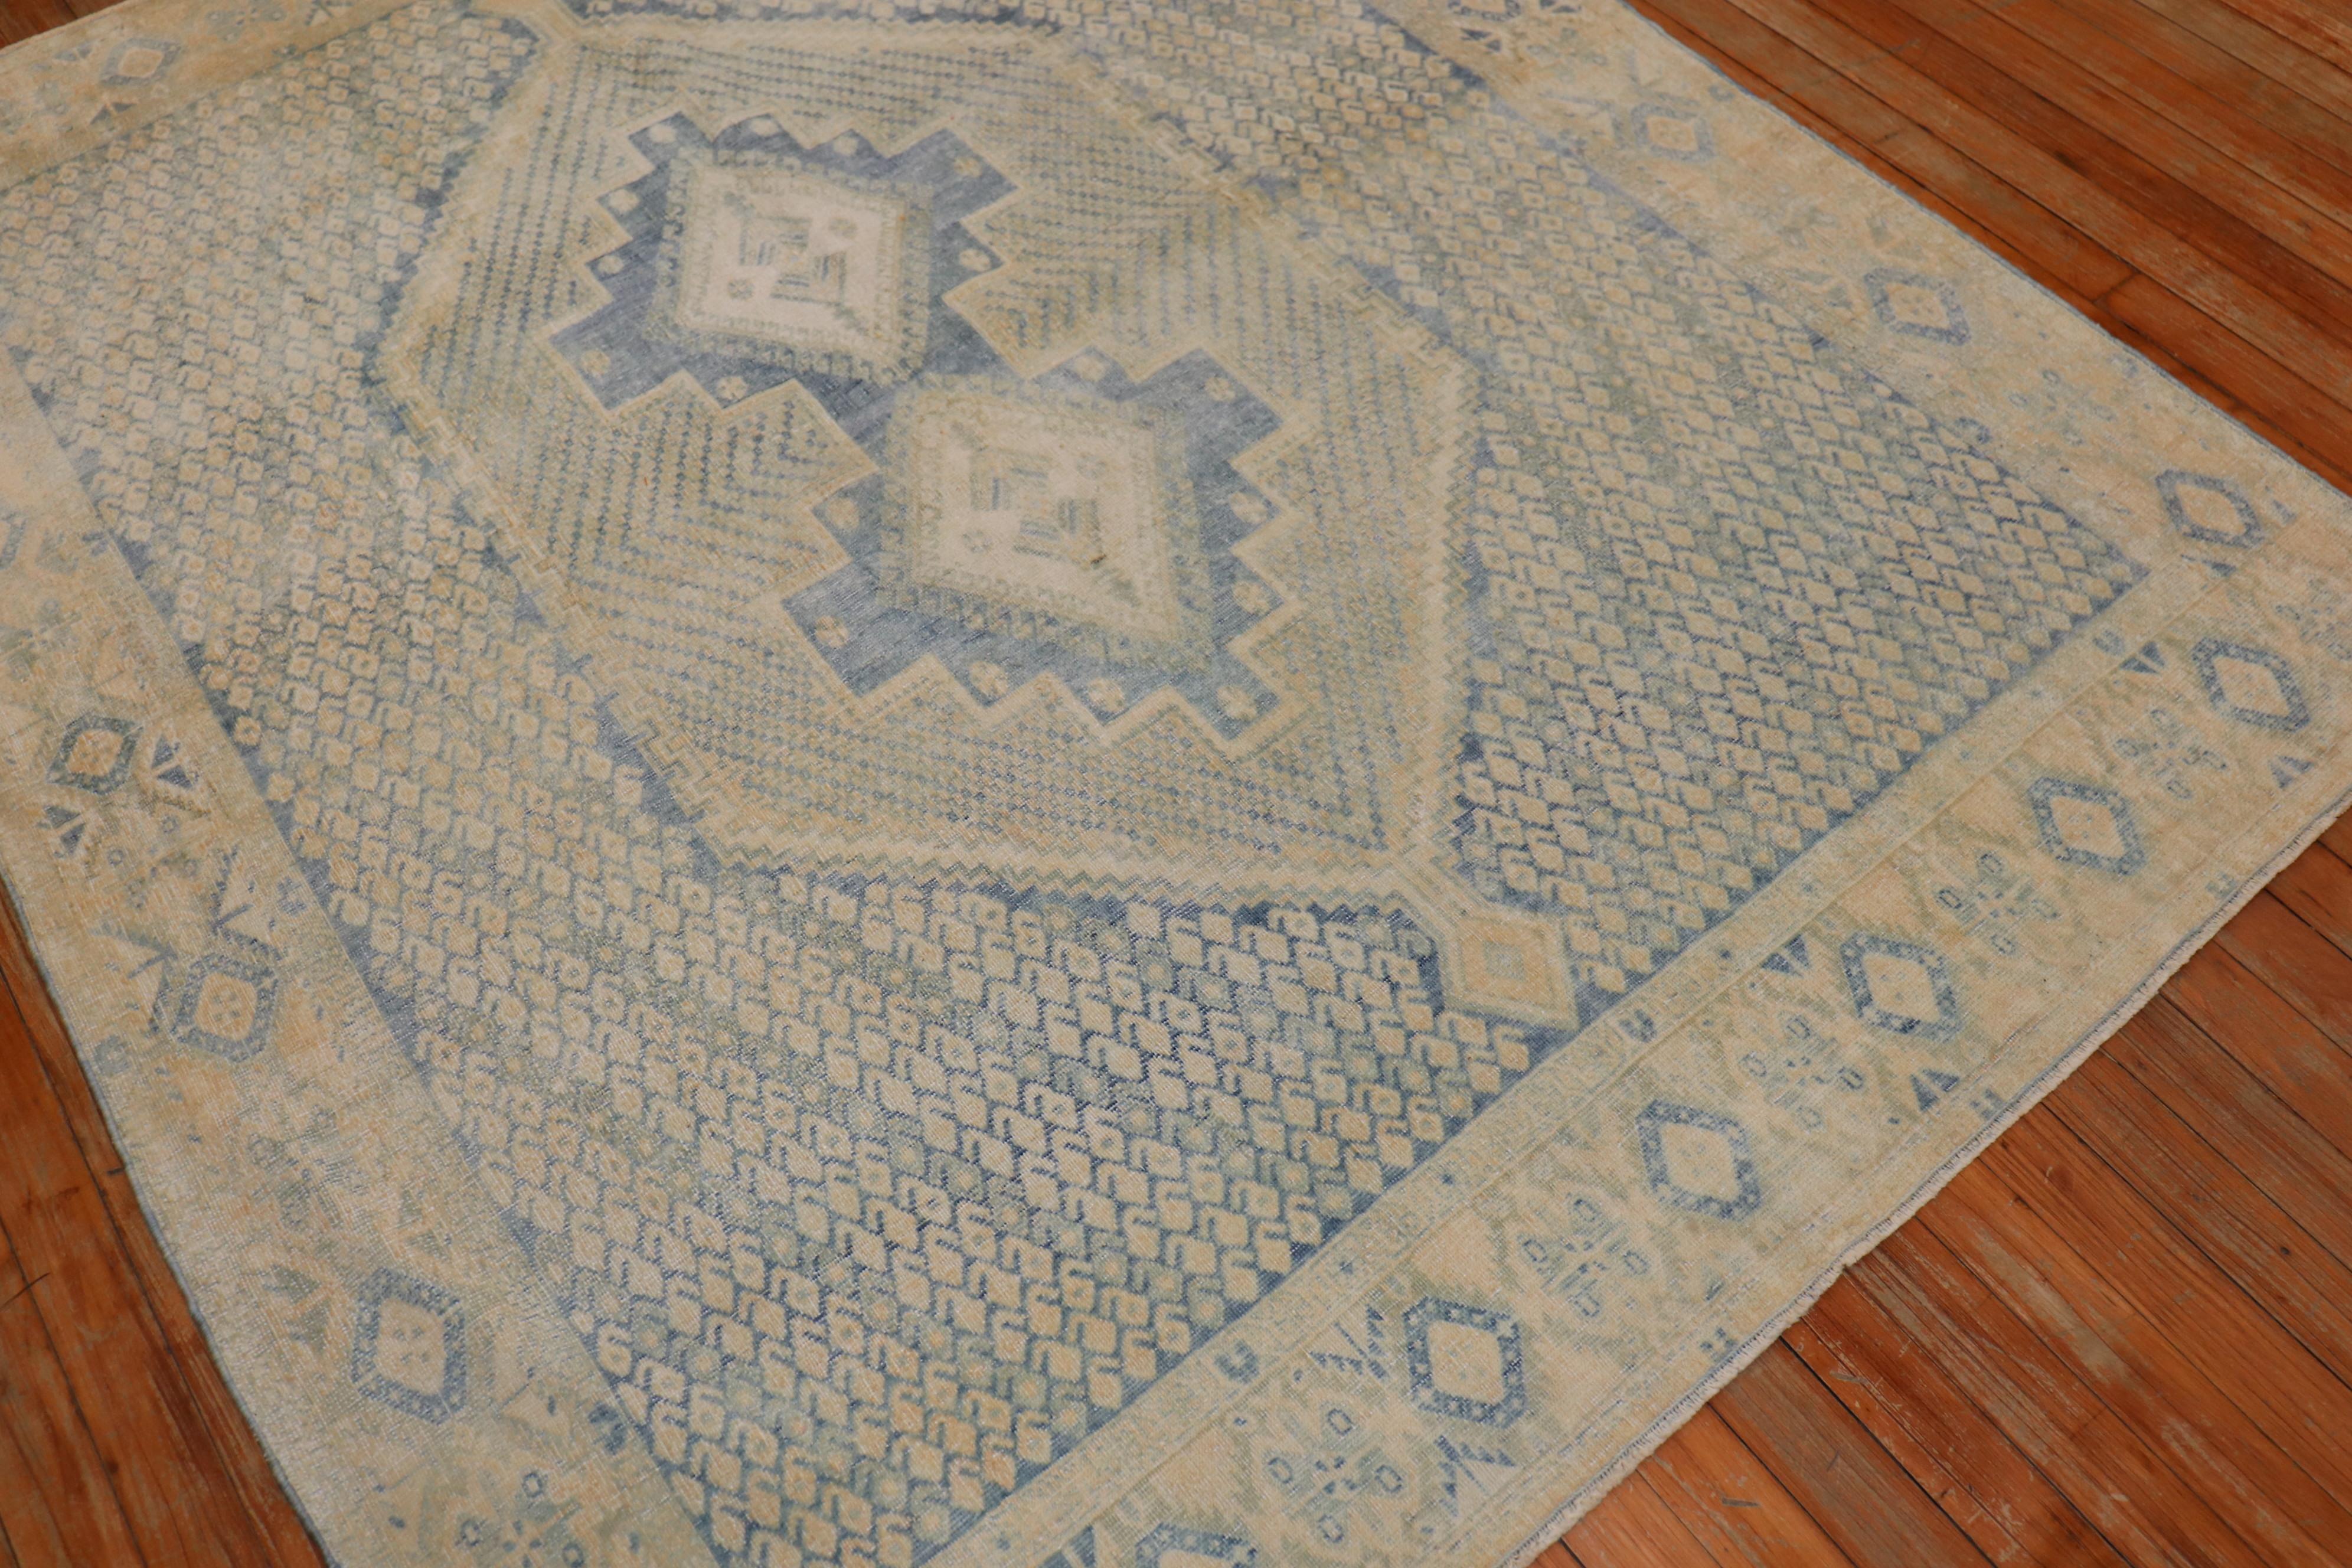 Mid 20th century Persian tribal rug in soft blue and sand tones

Measures: 5' x 6'4''.